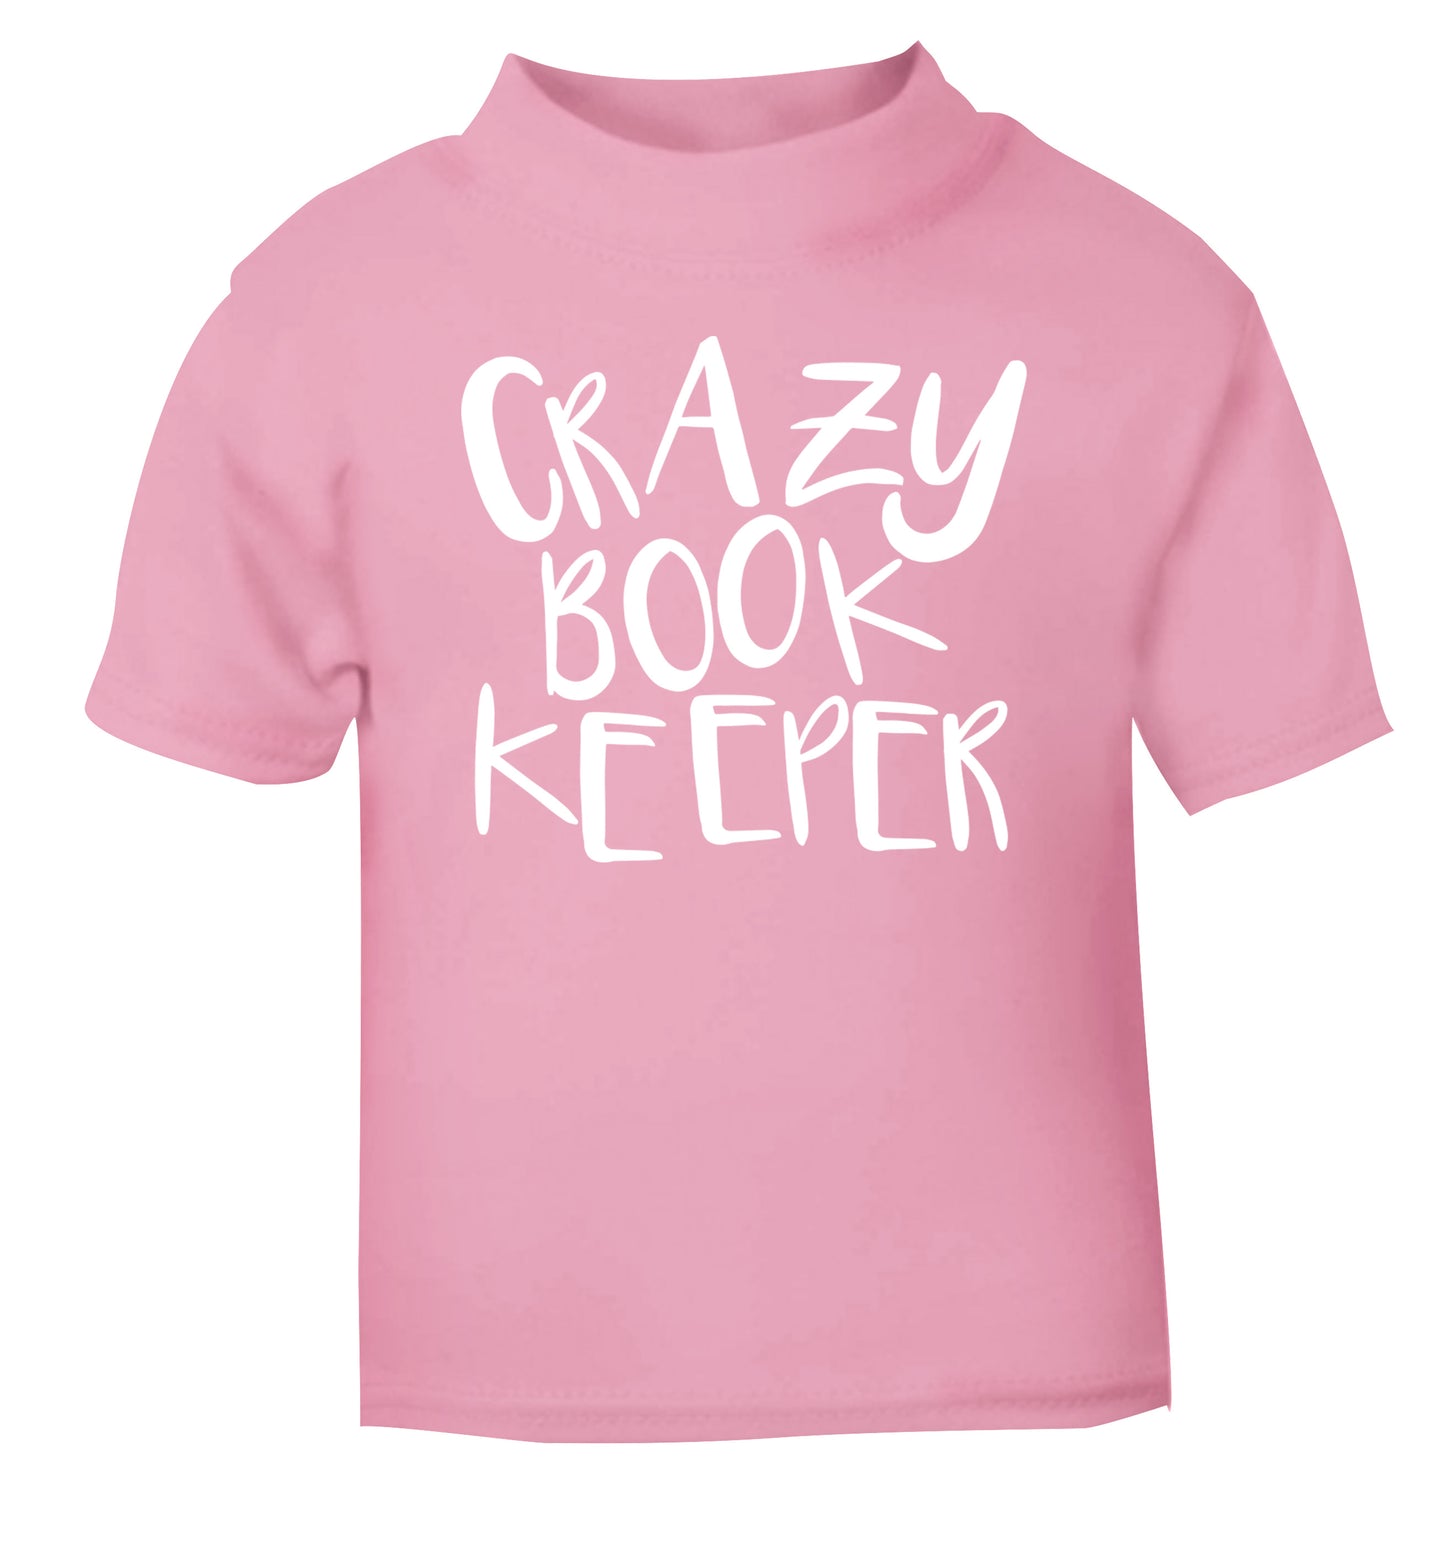 Crazy bookkeeper light pink Baby Toddler Tshirt 2 Years